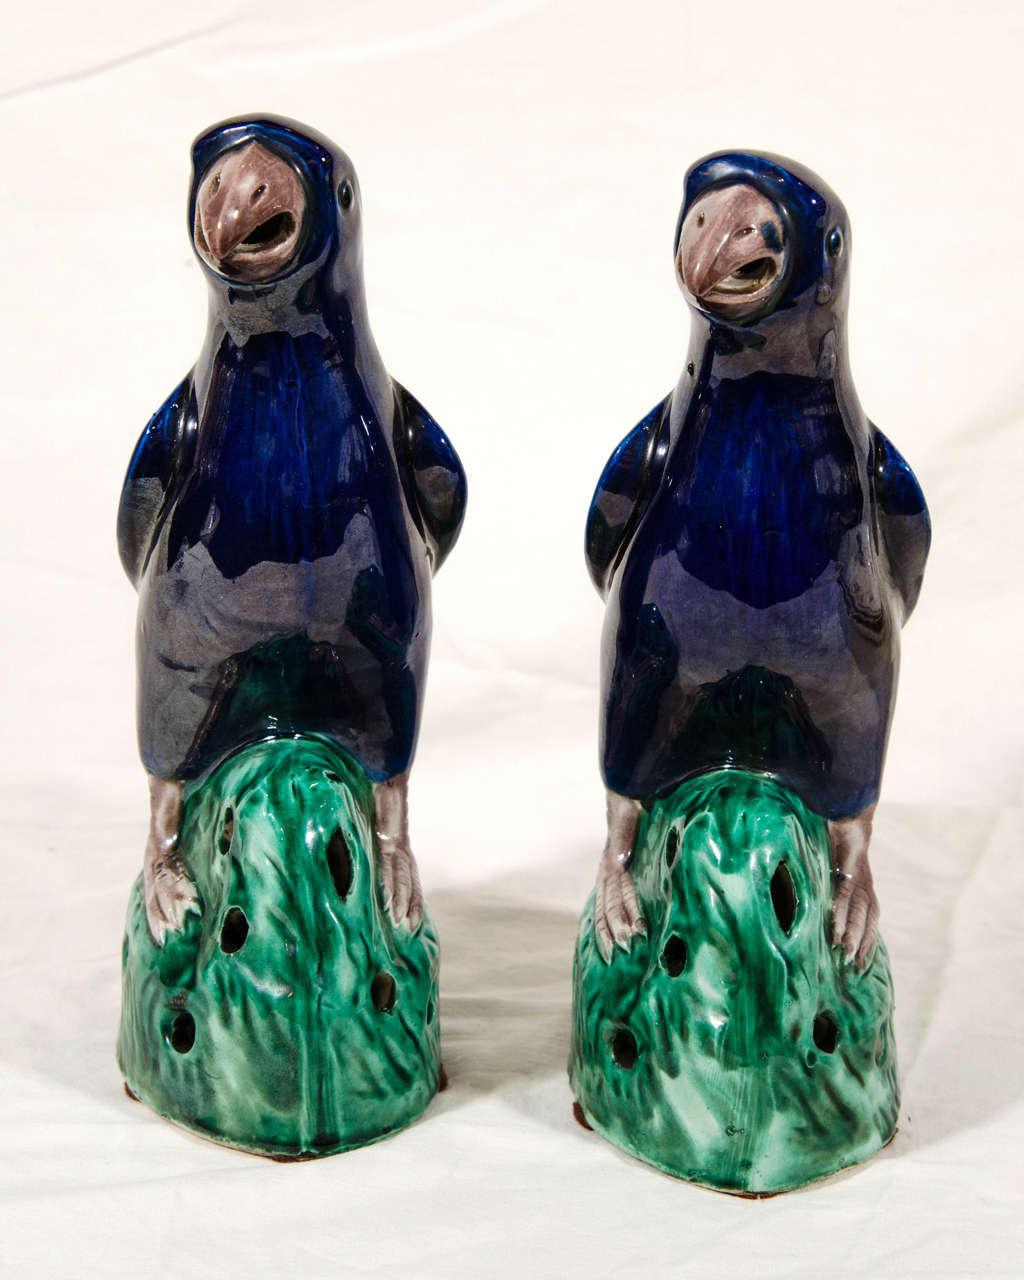 Glazed Pair of 19th Century Chinese Parrots with Cobalt Blue Glaze